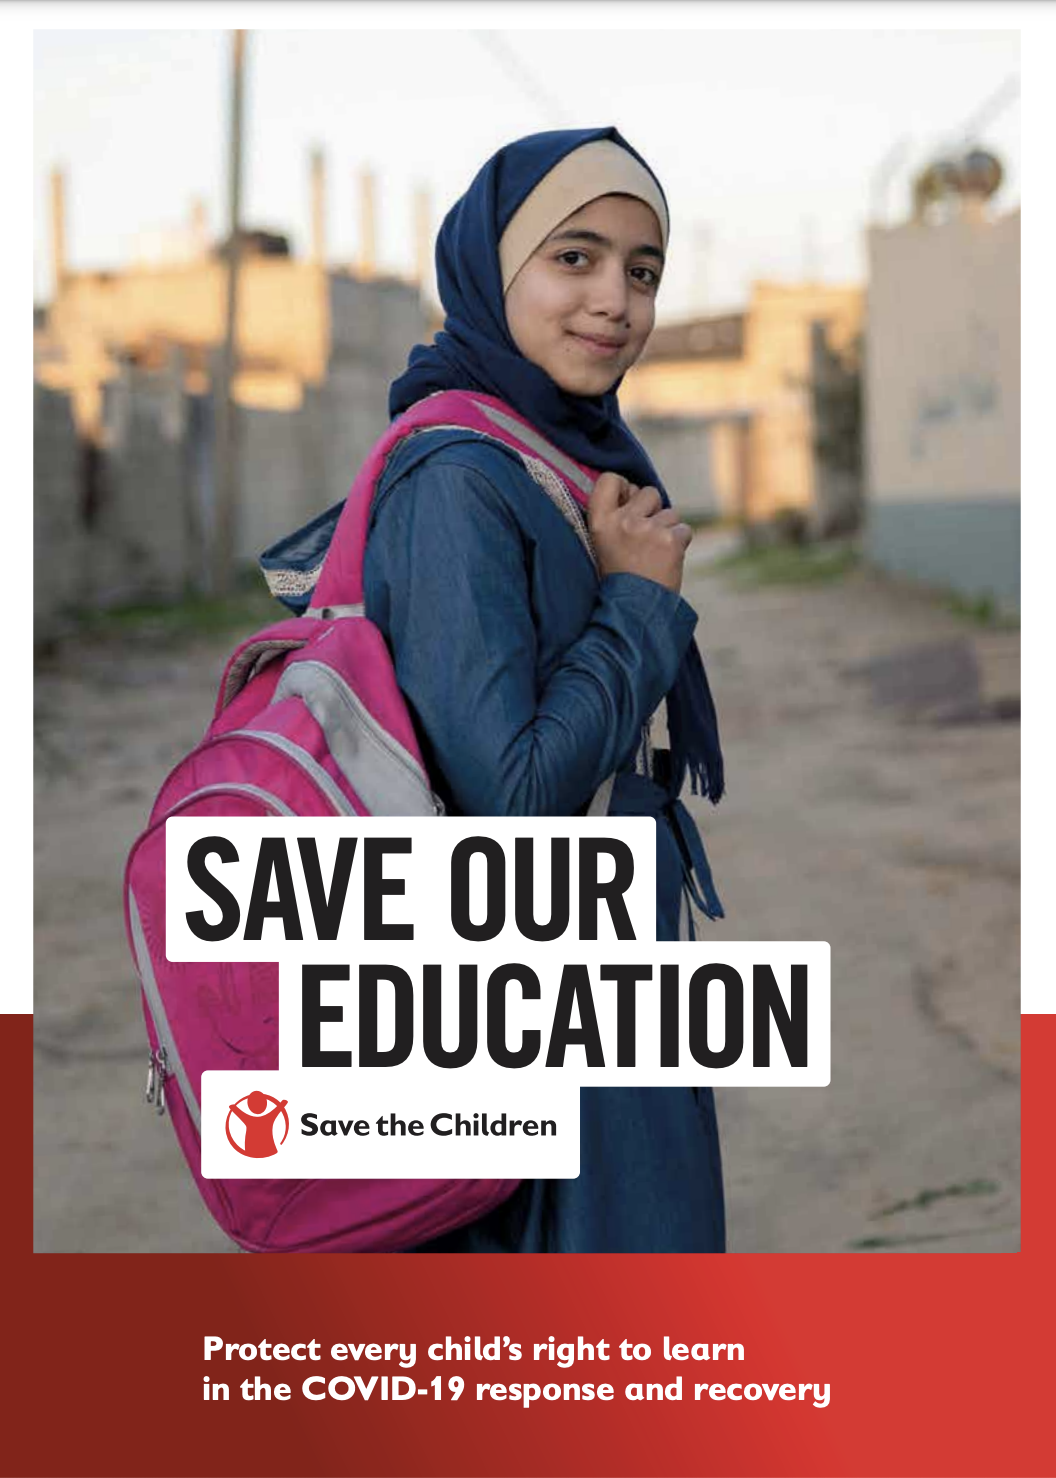 Save Our Education Report: Protect Every Child’s Right to Learn in the COVID-19 Response and Recovery